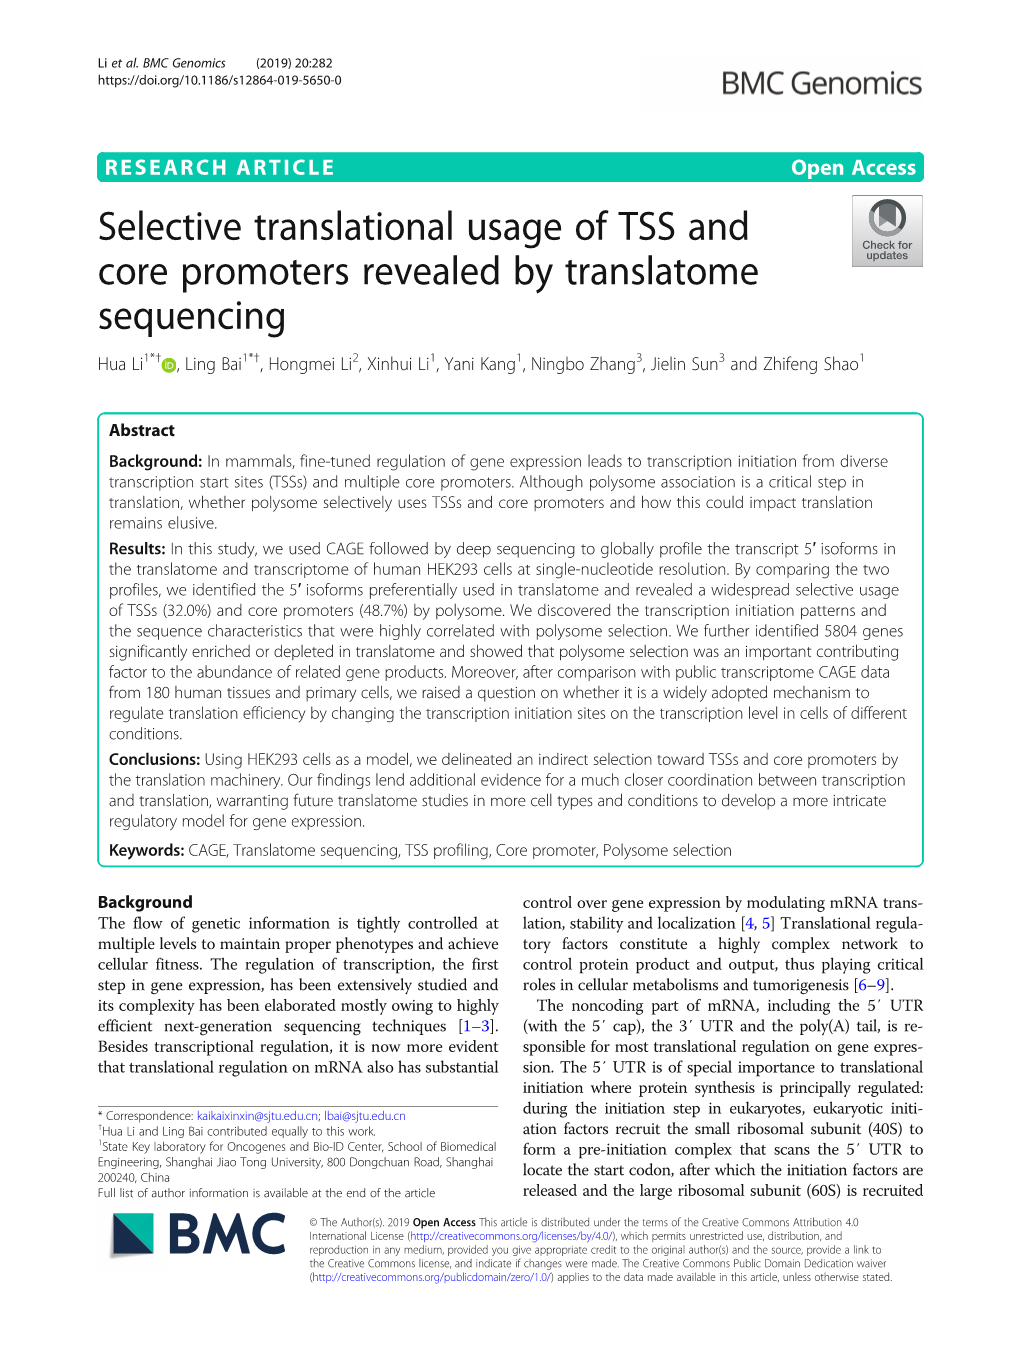 Selective Translational Usage of TSS and Core Promoters Revealed By